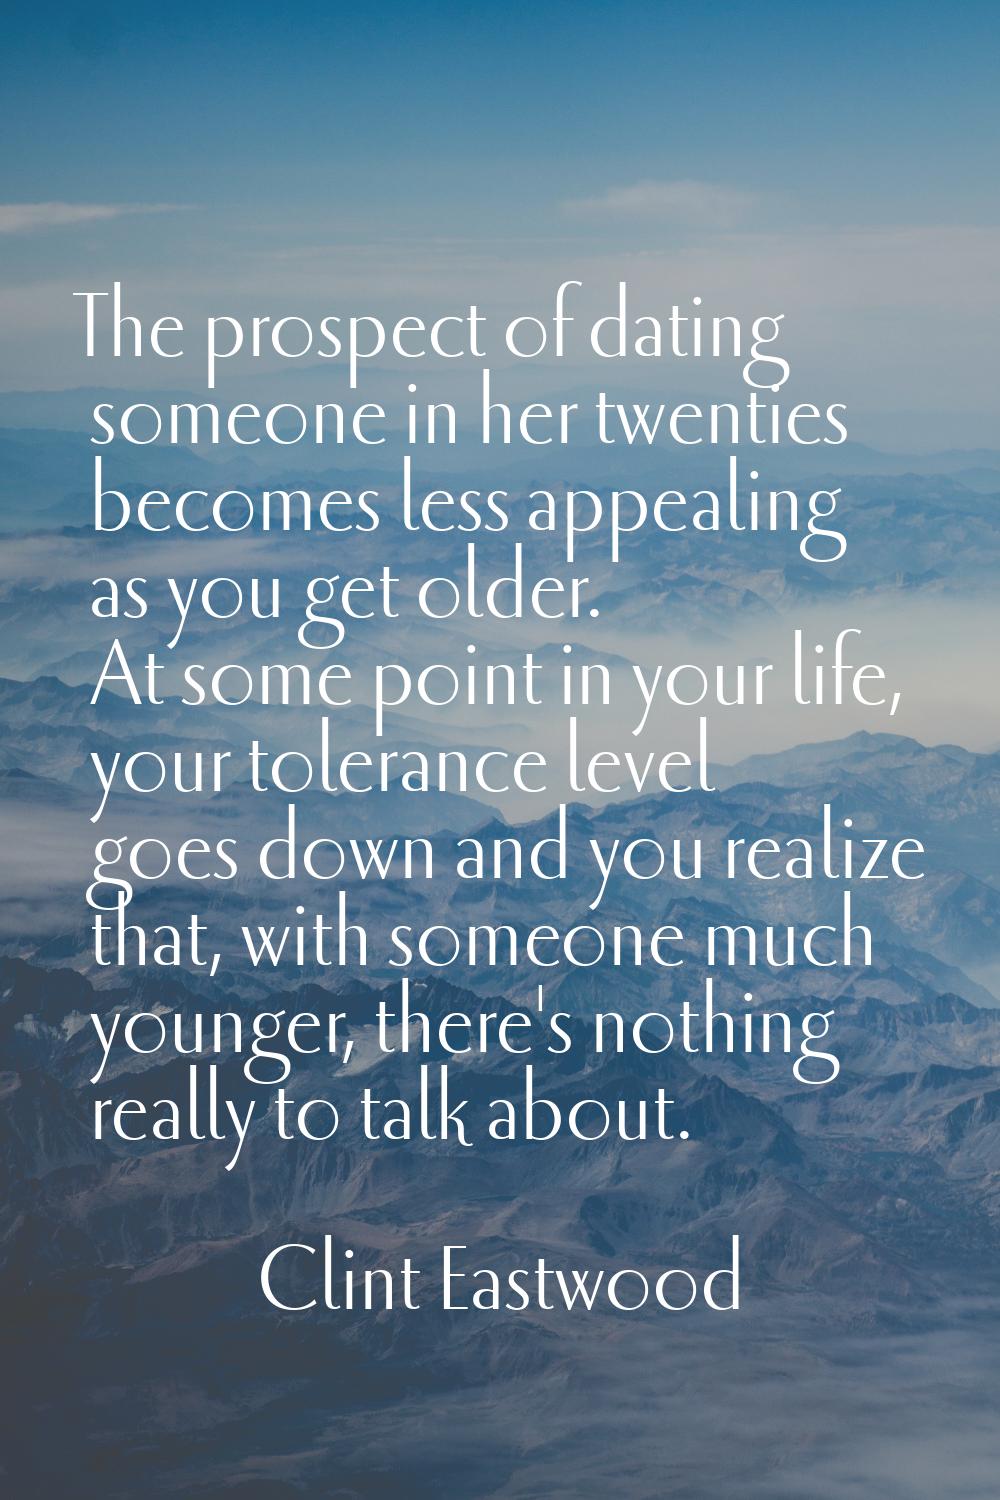 The prospect of dating someone in her twenties becomes less appealing as you get older. At some poi